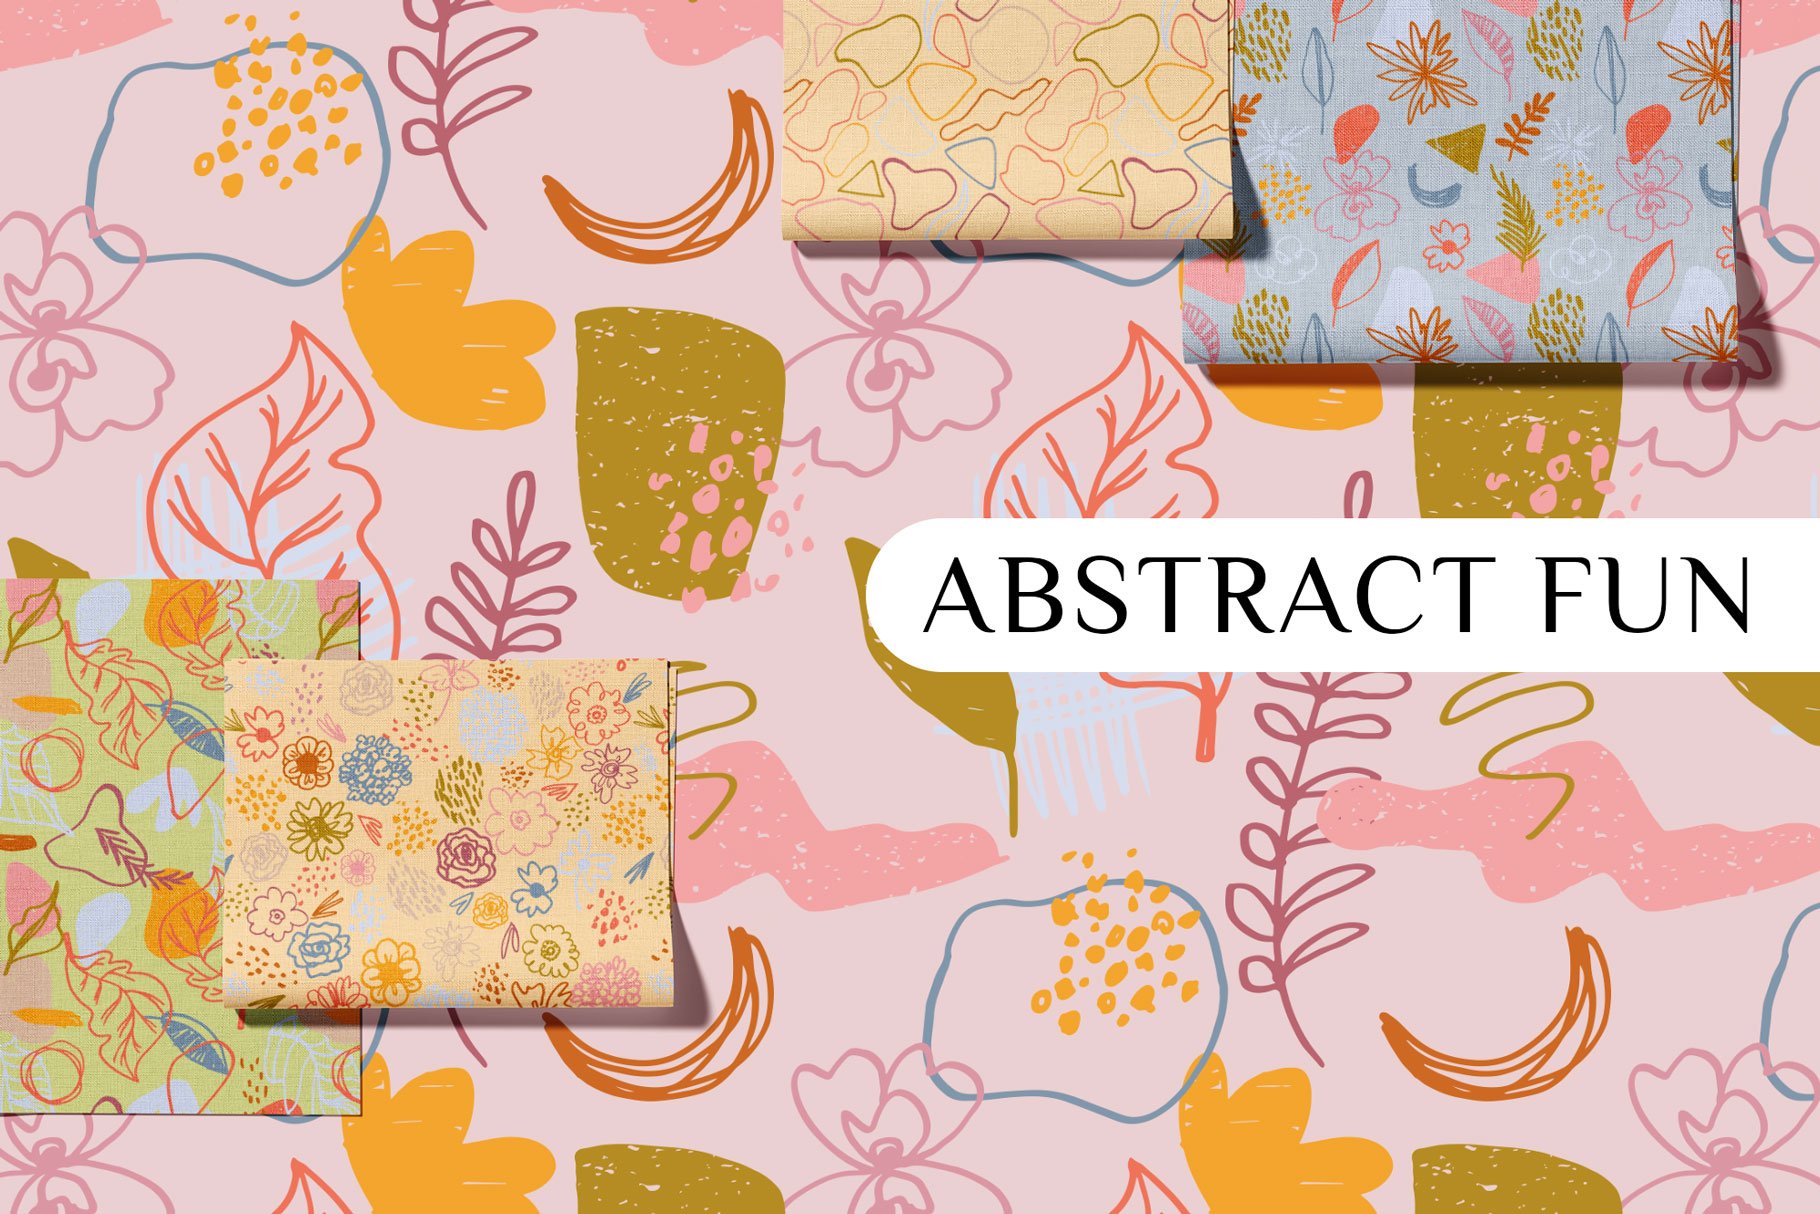 Abstract Fun Seamless Patterns Vector Collection